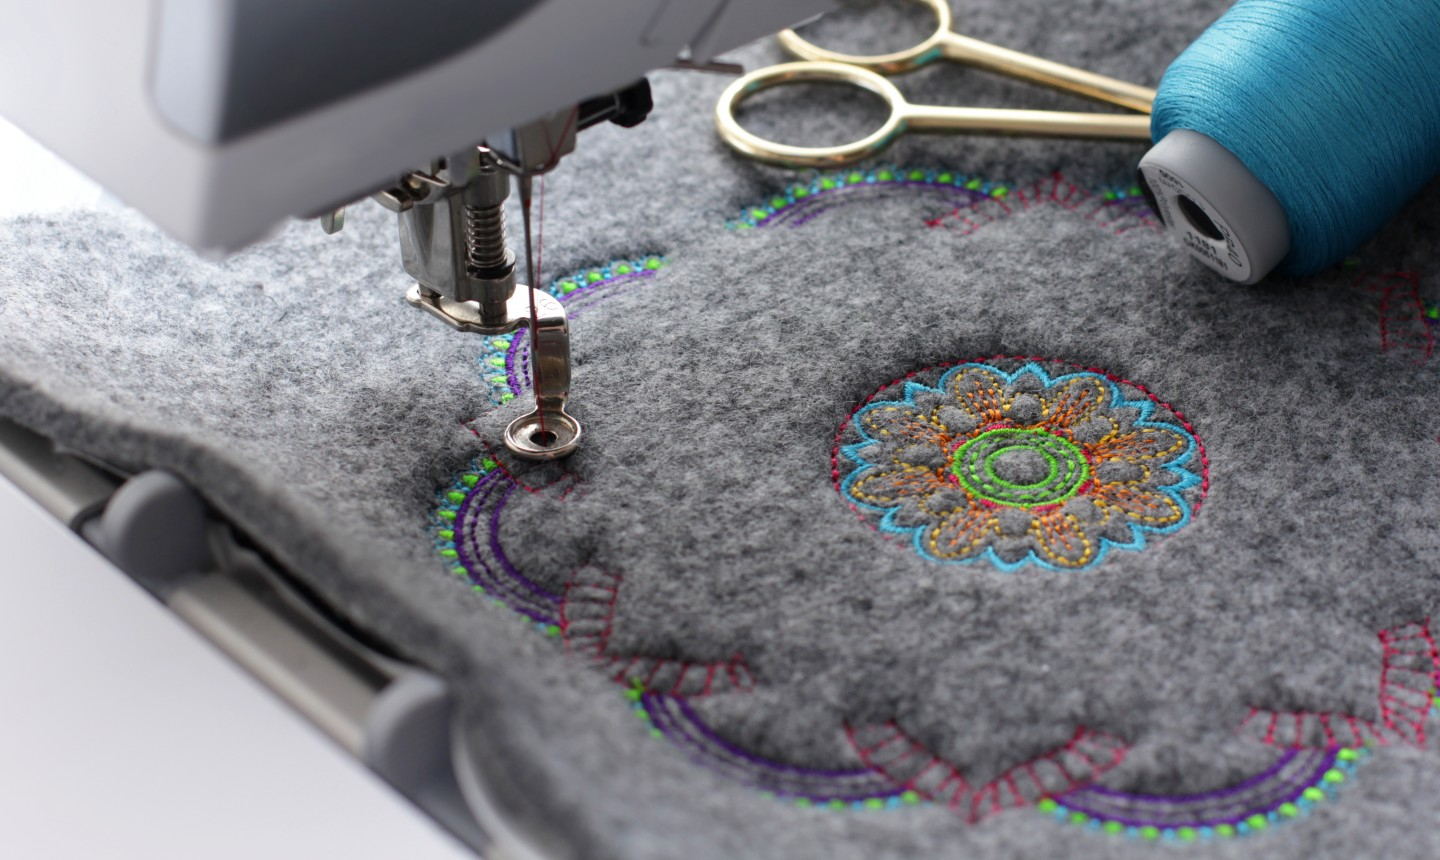 Brother Sewing Machine Embroidery Patterns Our 7 Top Tips For Machine Embroidery Newbies